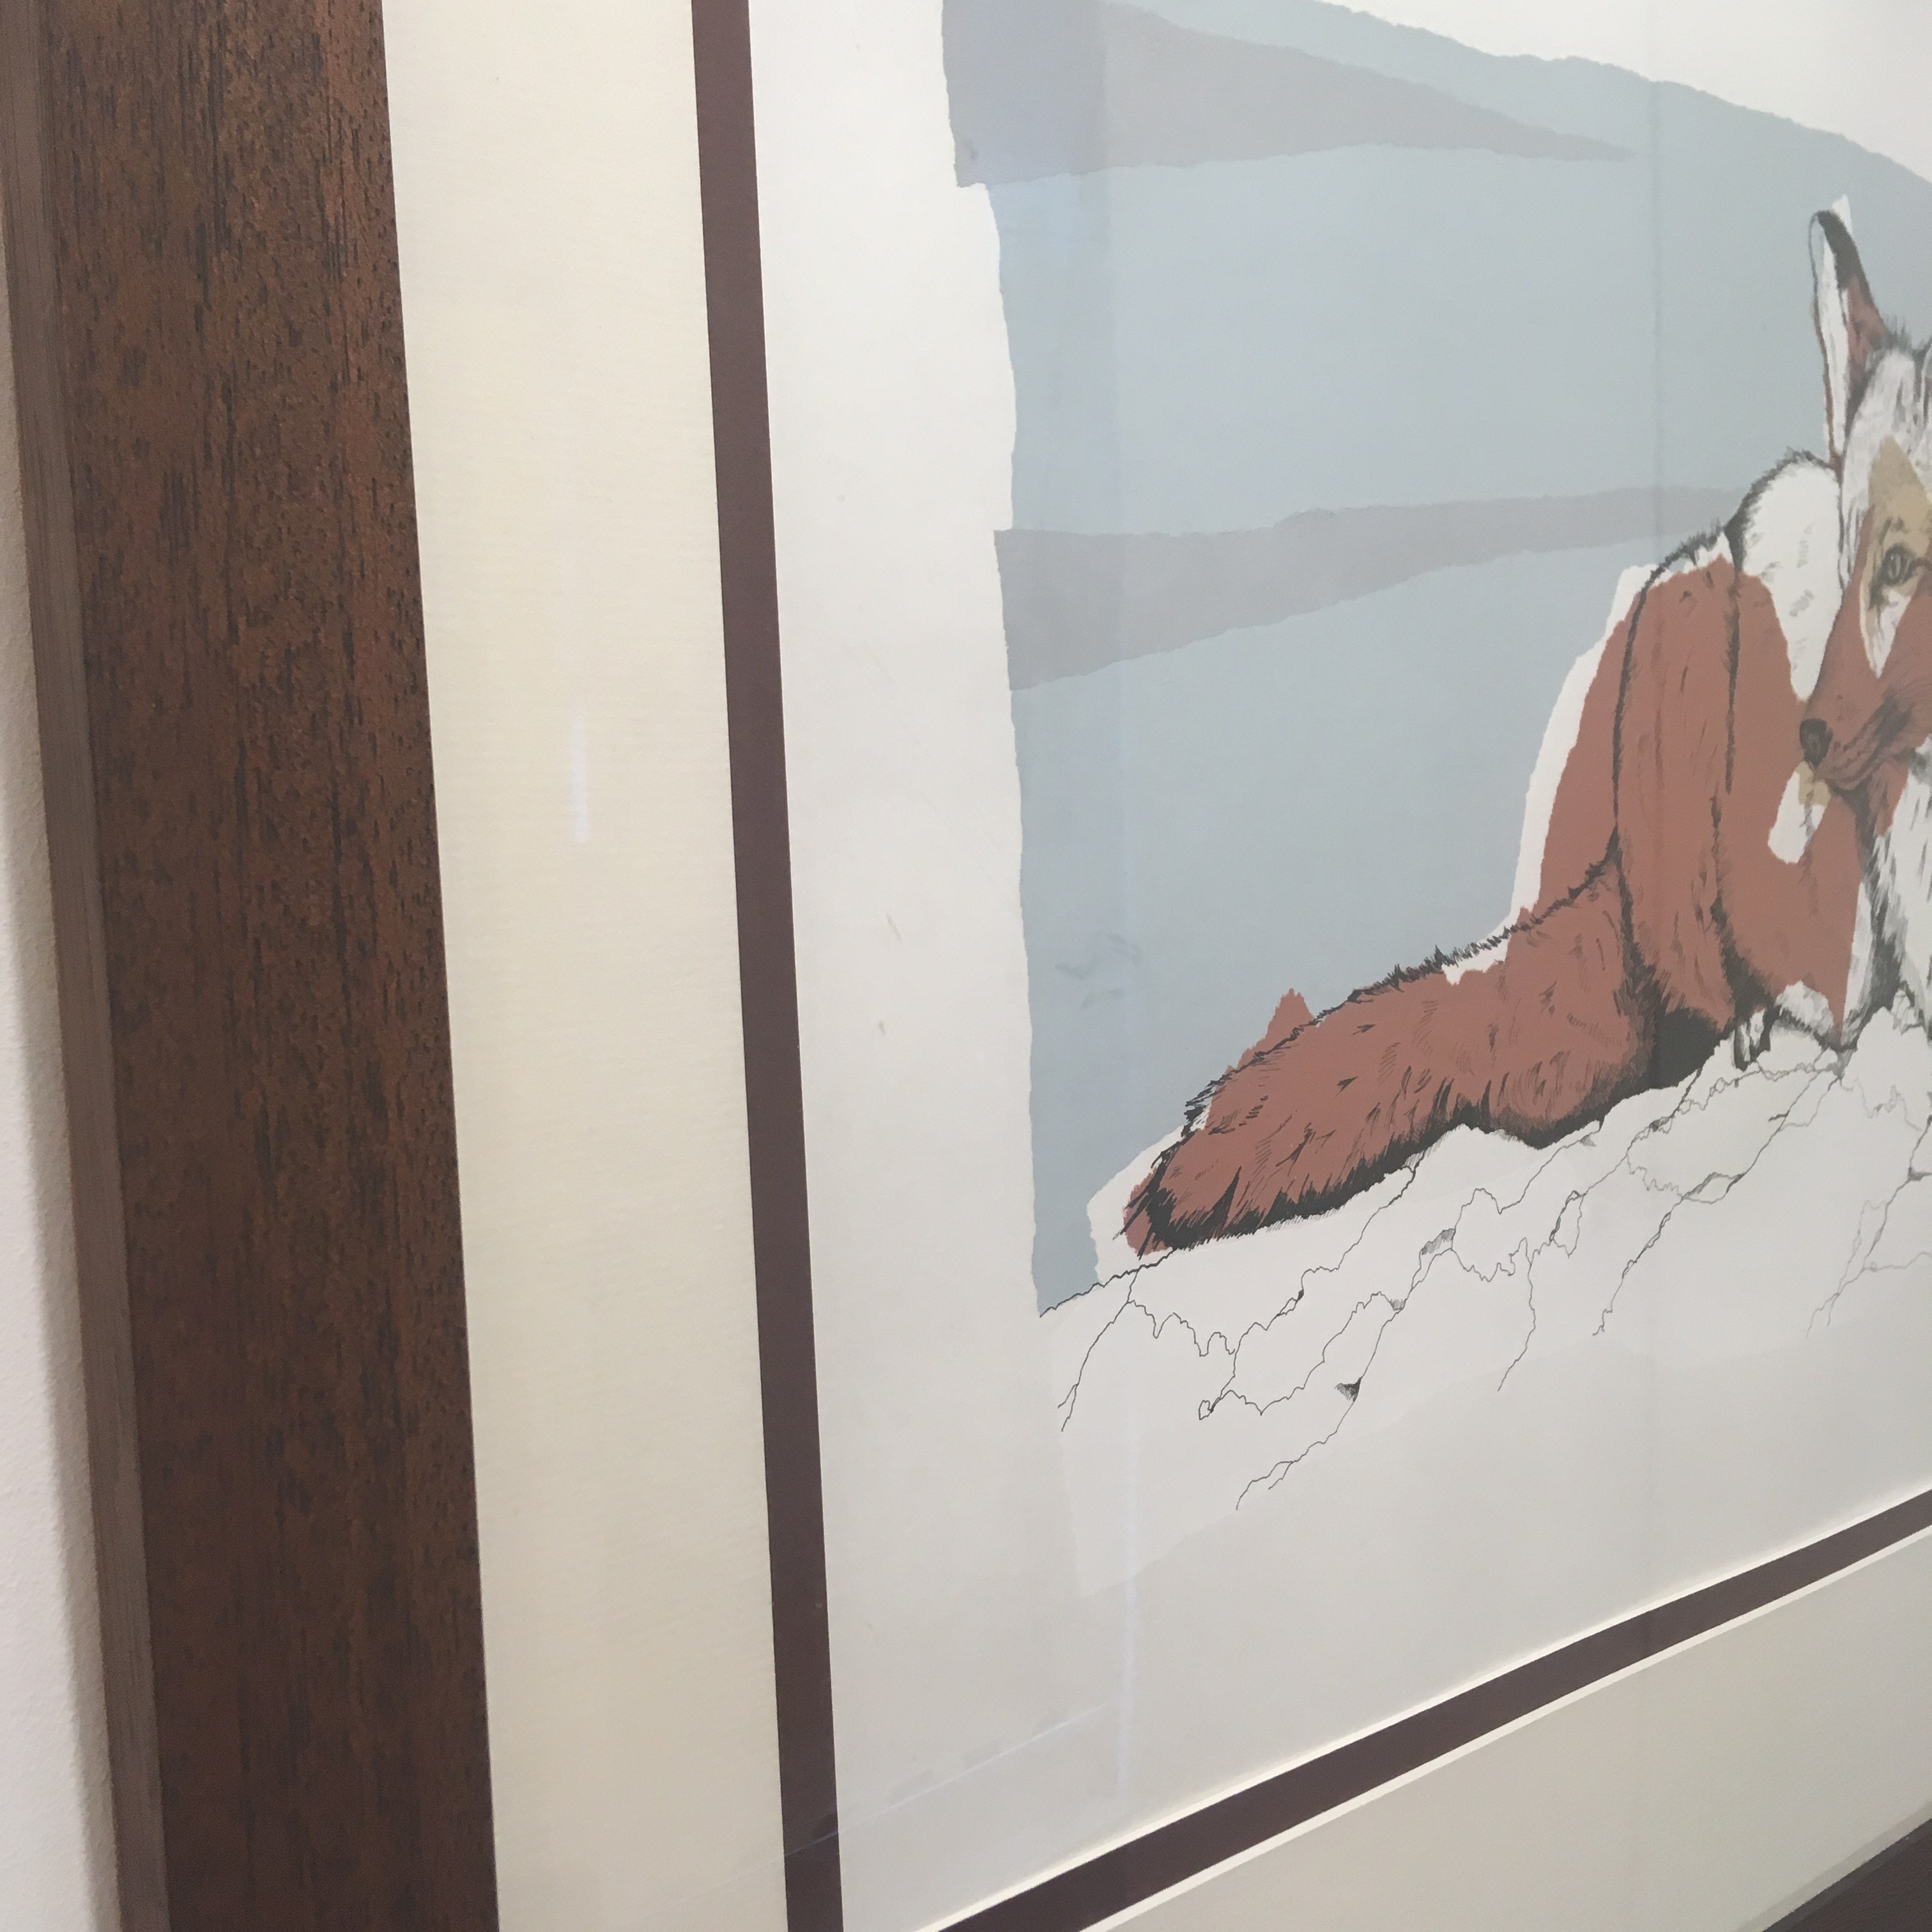 ''Foxy' - Original Screenprint with Pen and Ink' by artist Joanna Mcdonough